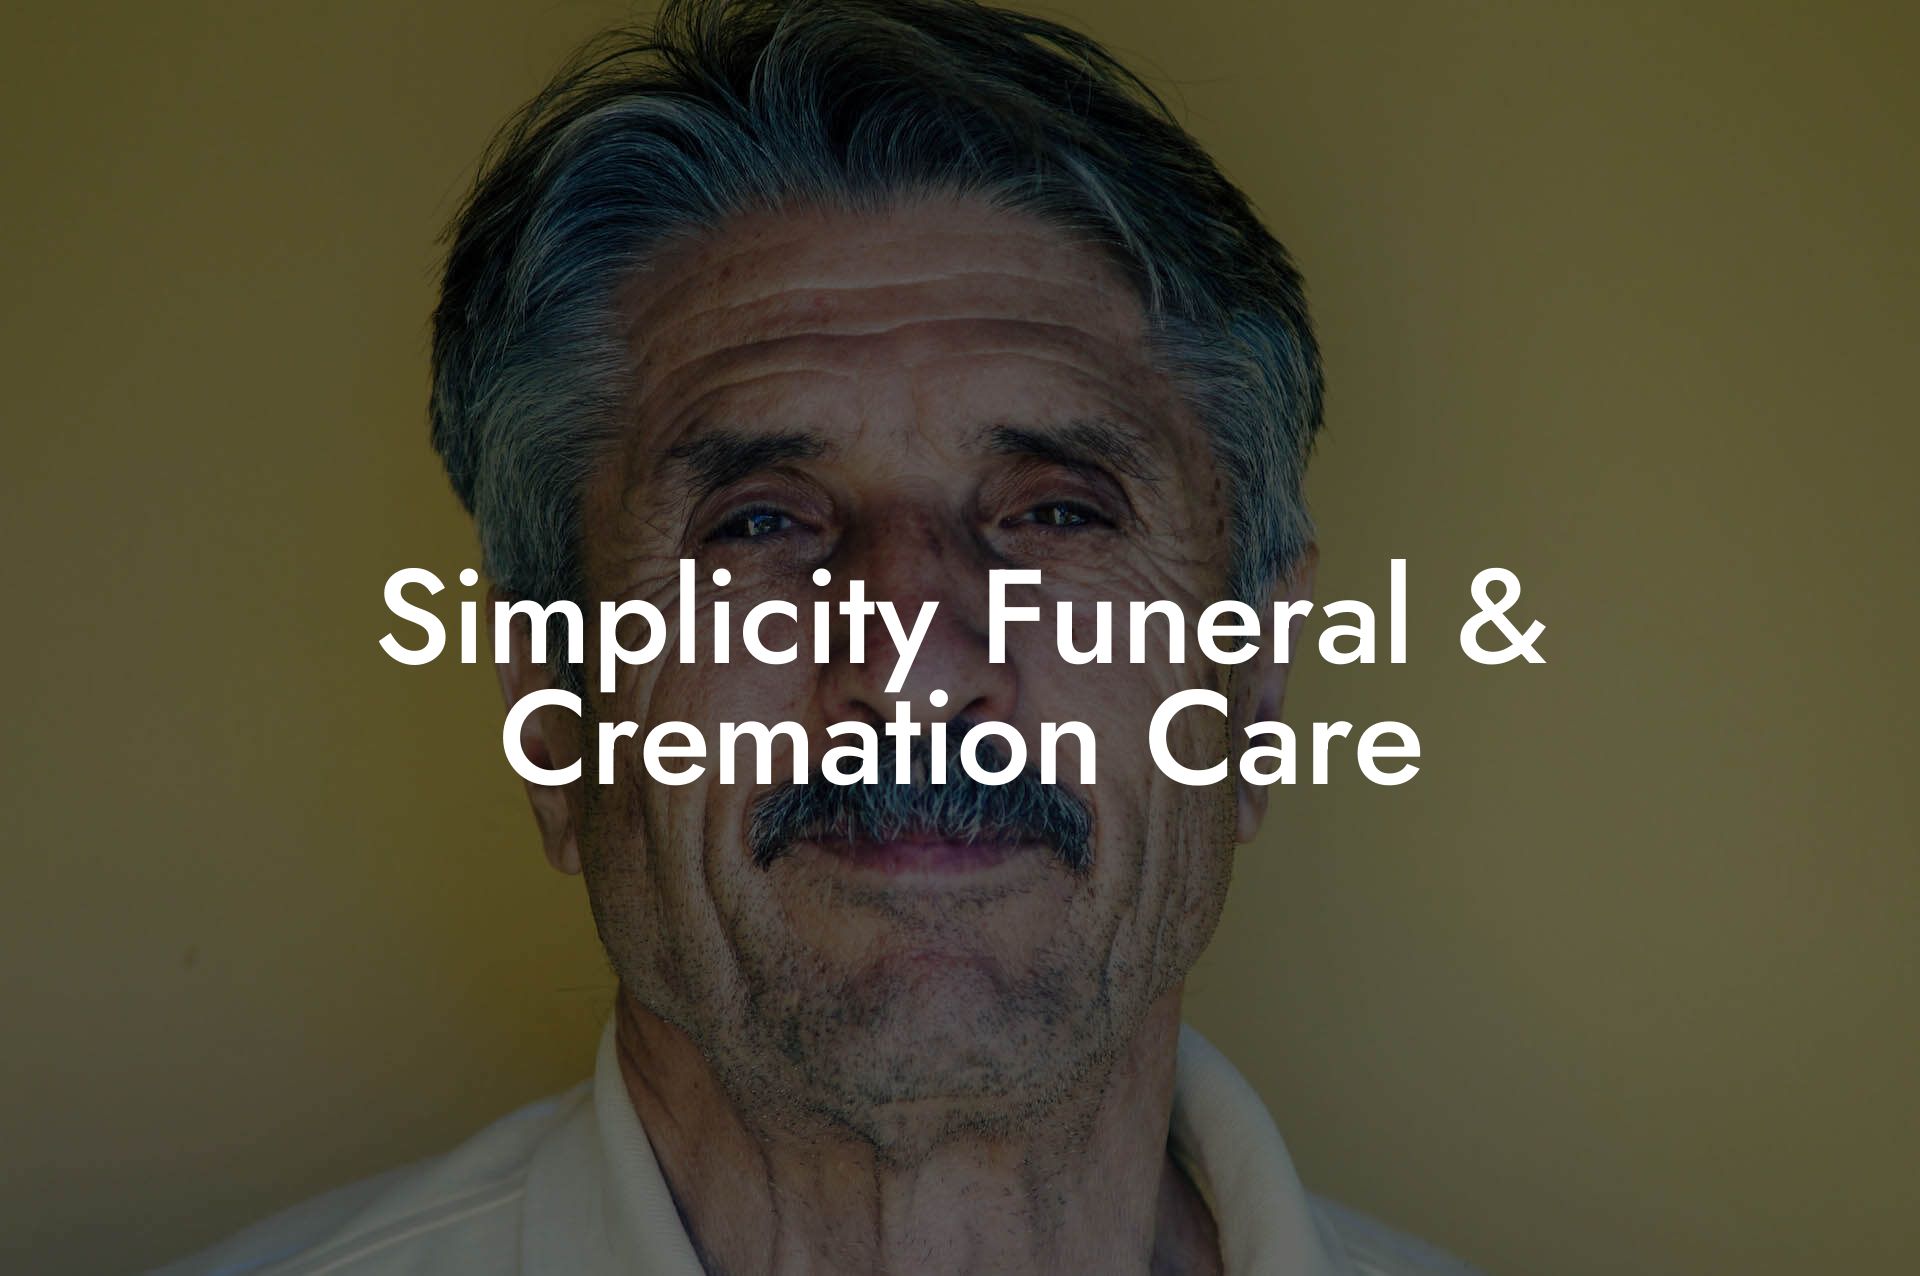 Simplicity Funeral & Cremation Care